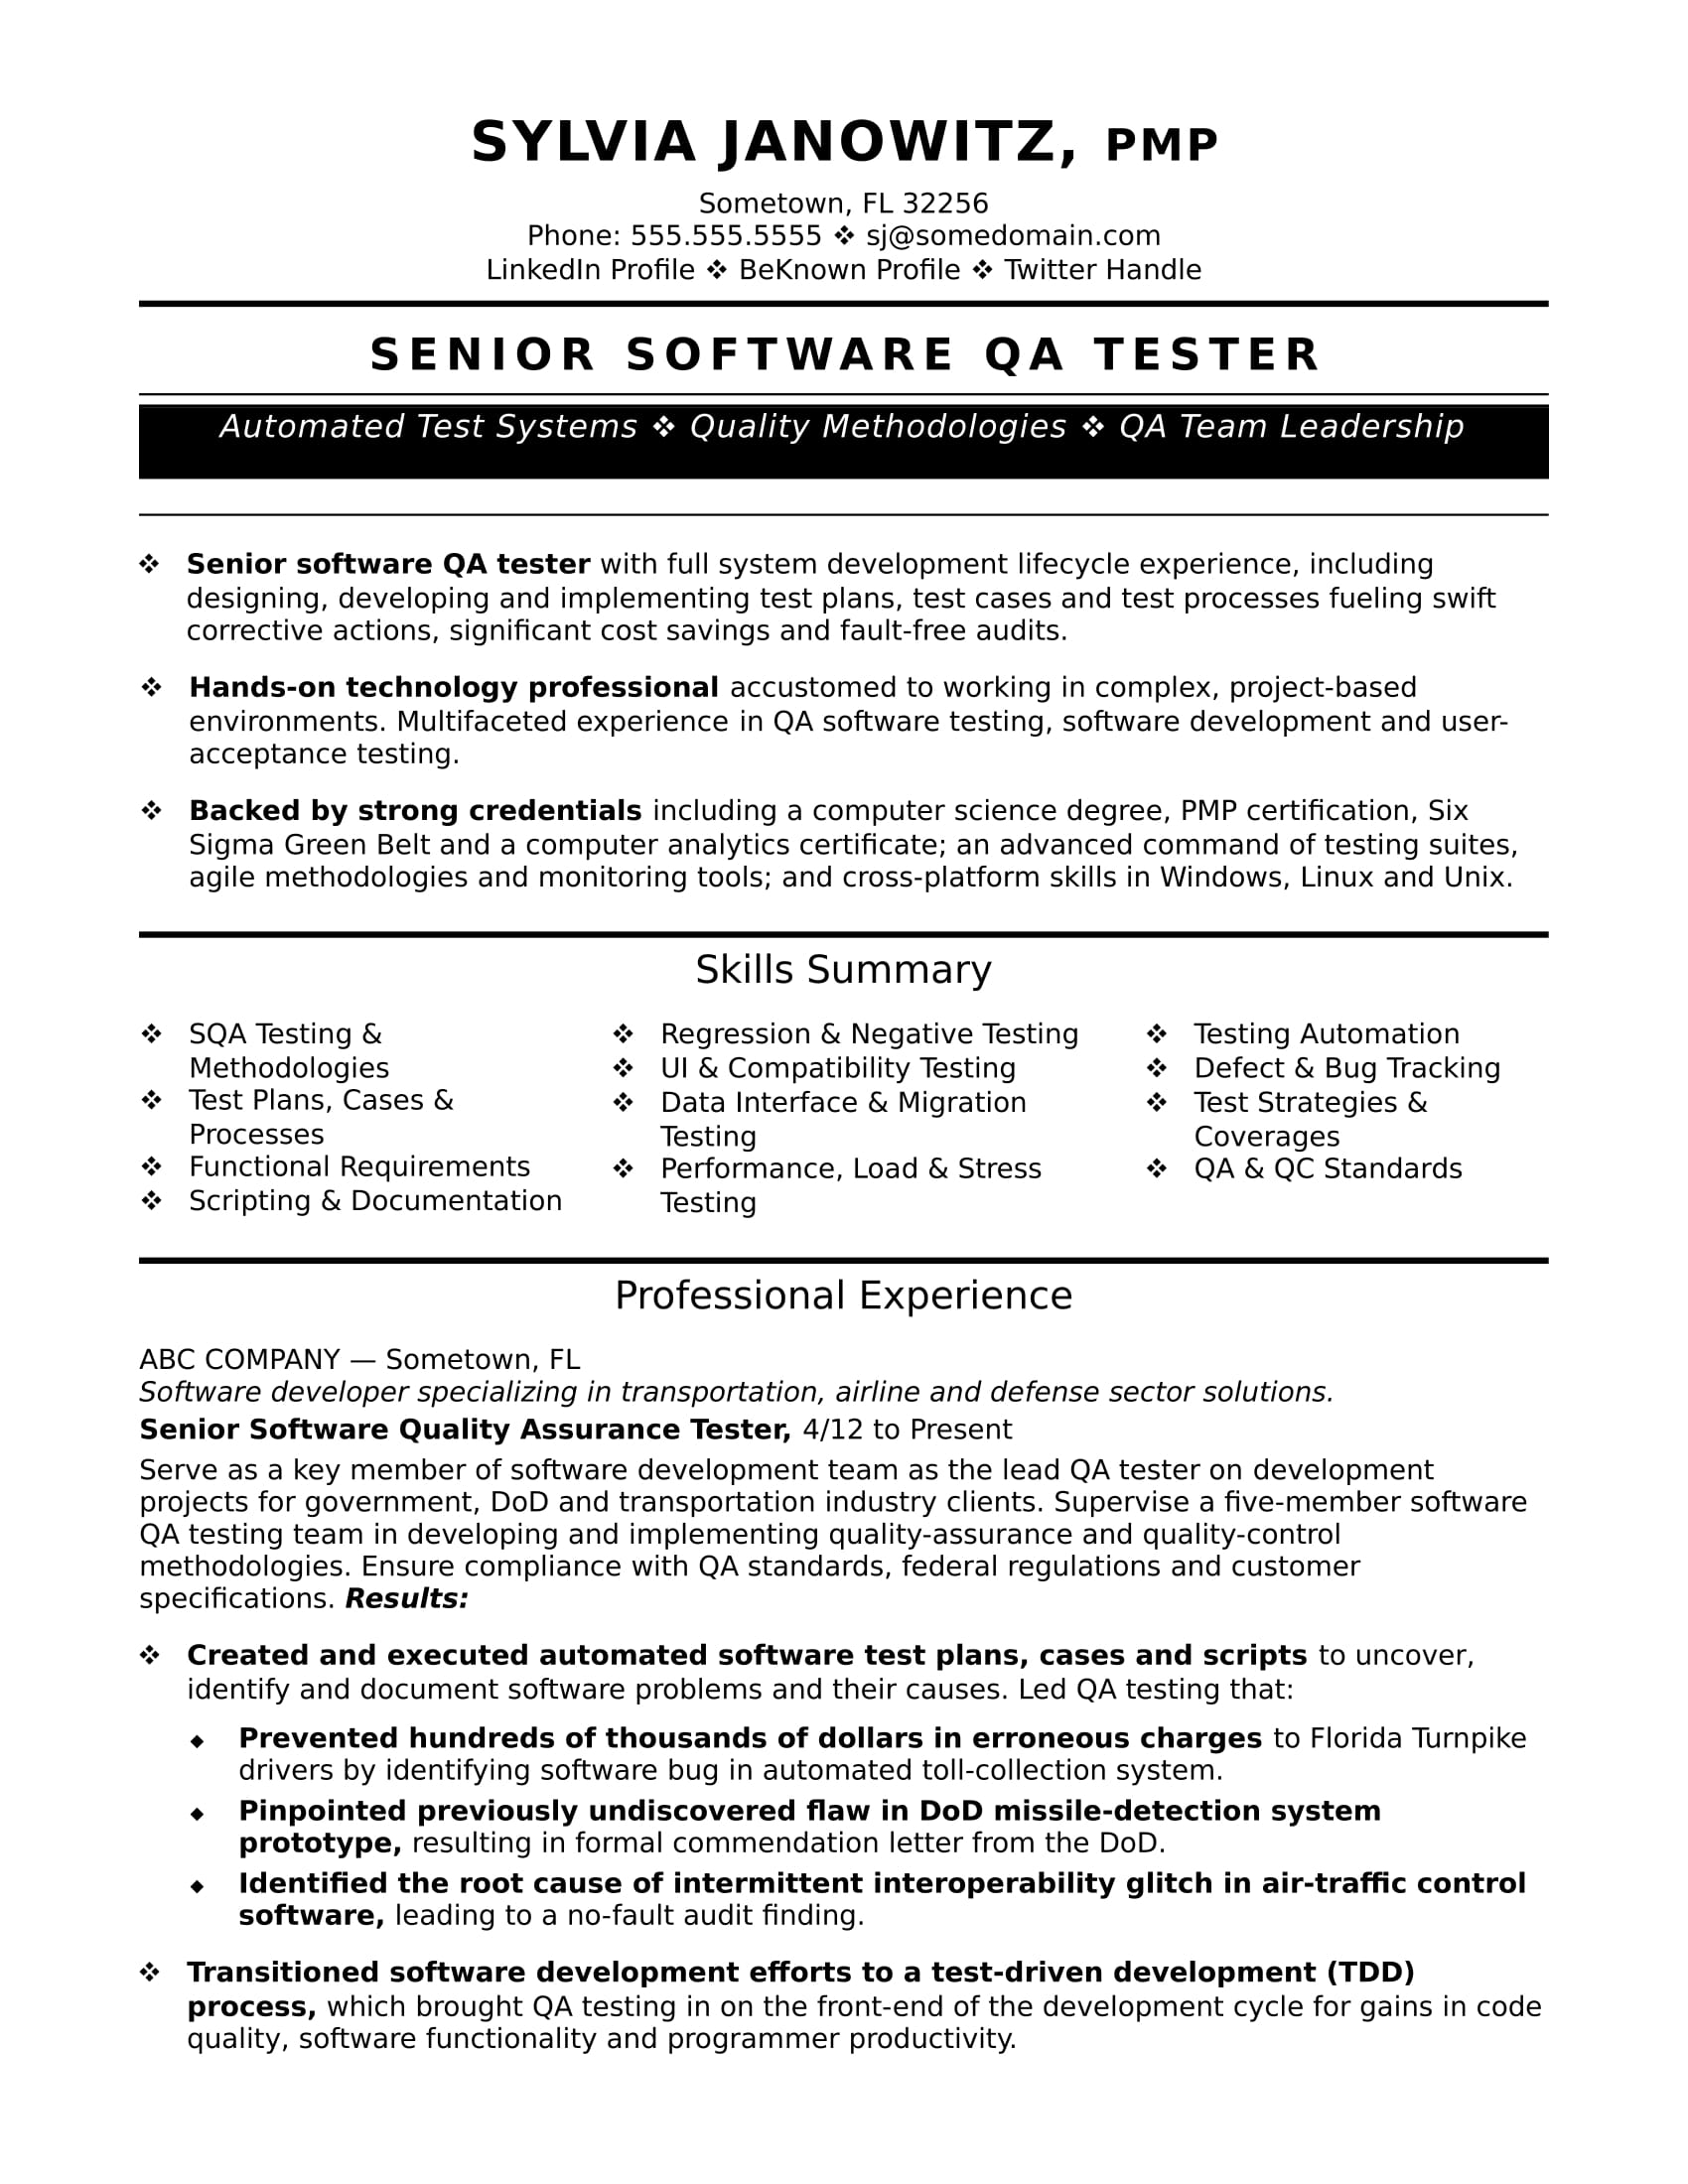 Test Analyst Resume Template | Mt Home Arts